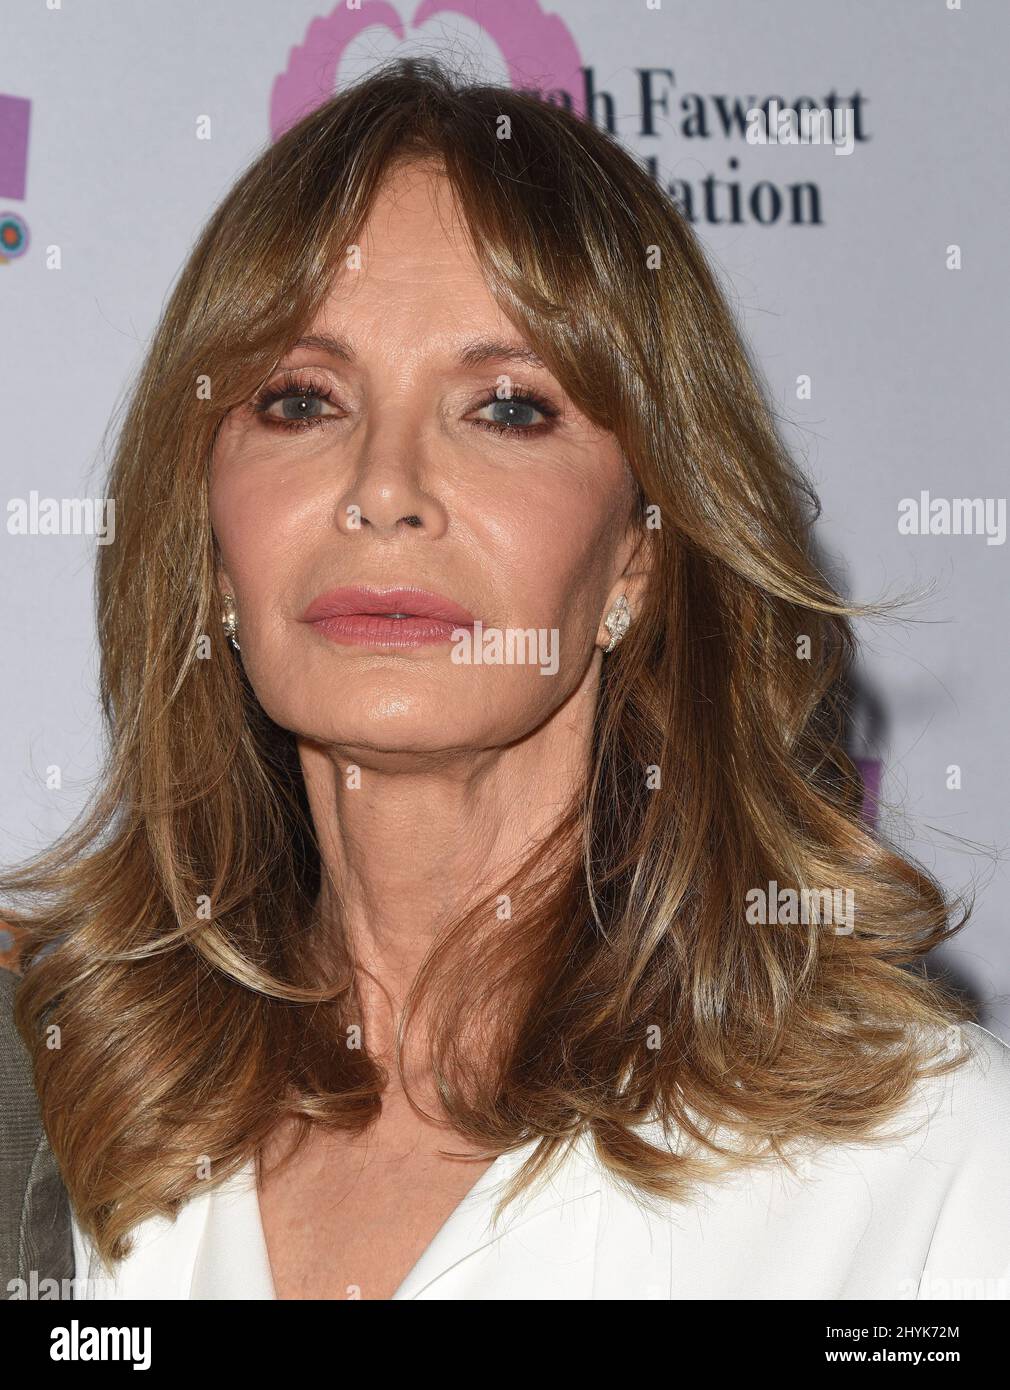 Jaclyn Smith at The Farrah Fawcett Foundation's Tex-Mex Fiesta held at the Wallis Annenberg Center for the Performing Arts on September 6, 2019 in Beverly Hills, USA. Stock Photo